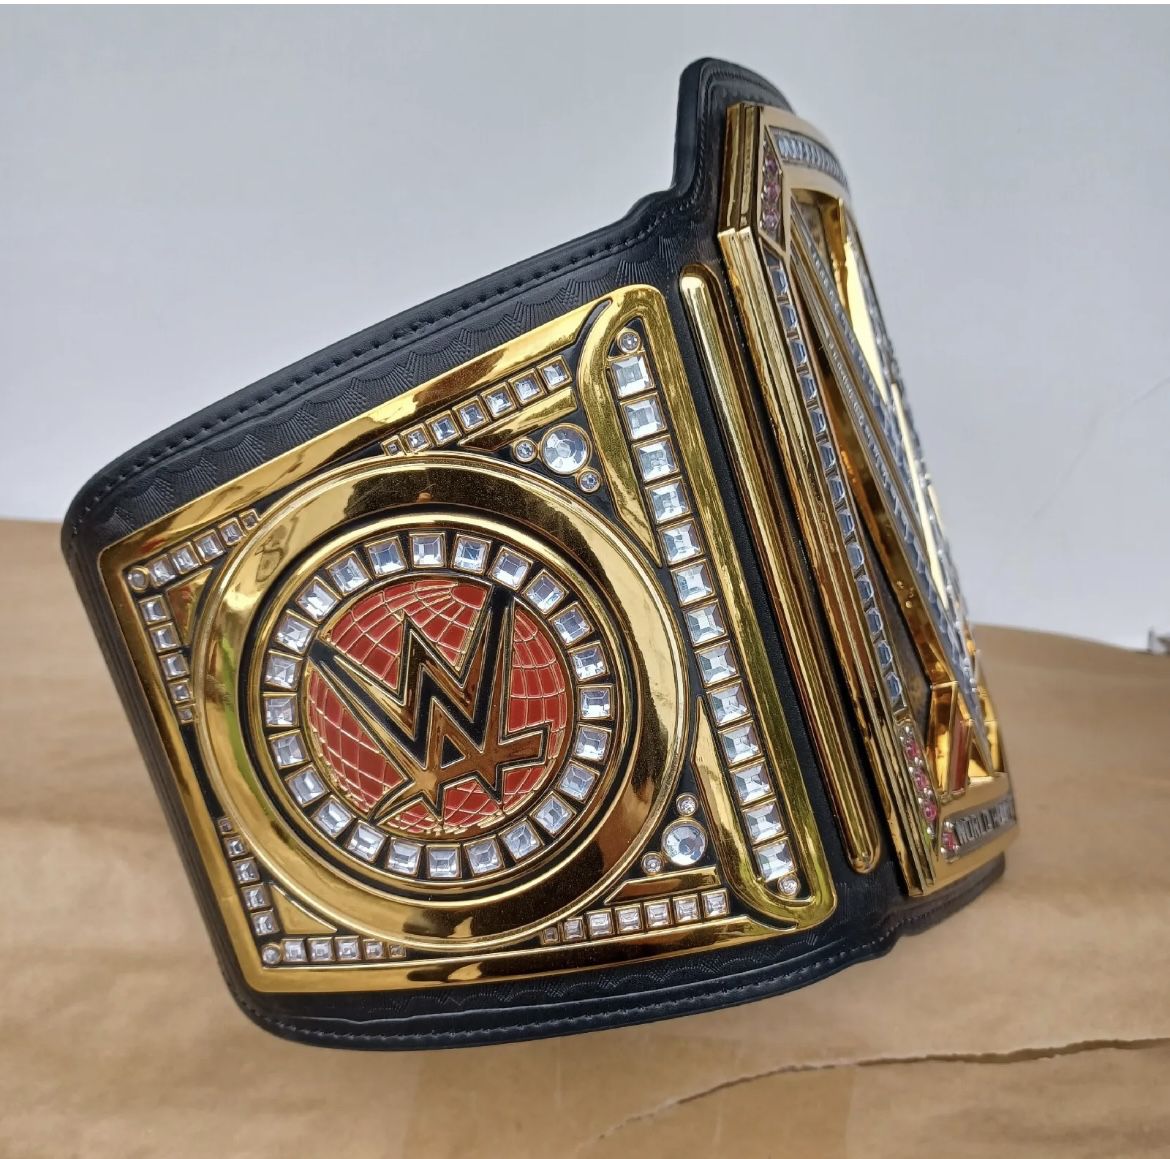 Wwe Big Gold Belt for Sale in Lakewood, CA - OfferUp